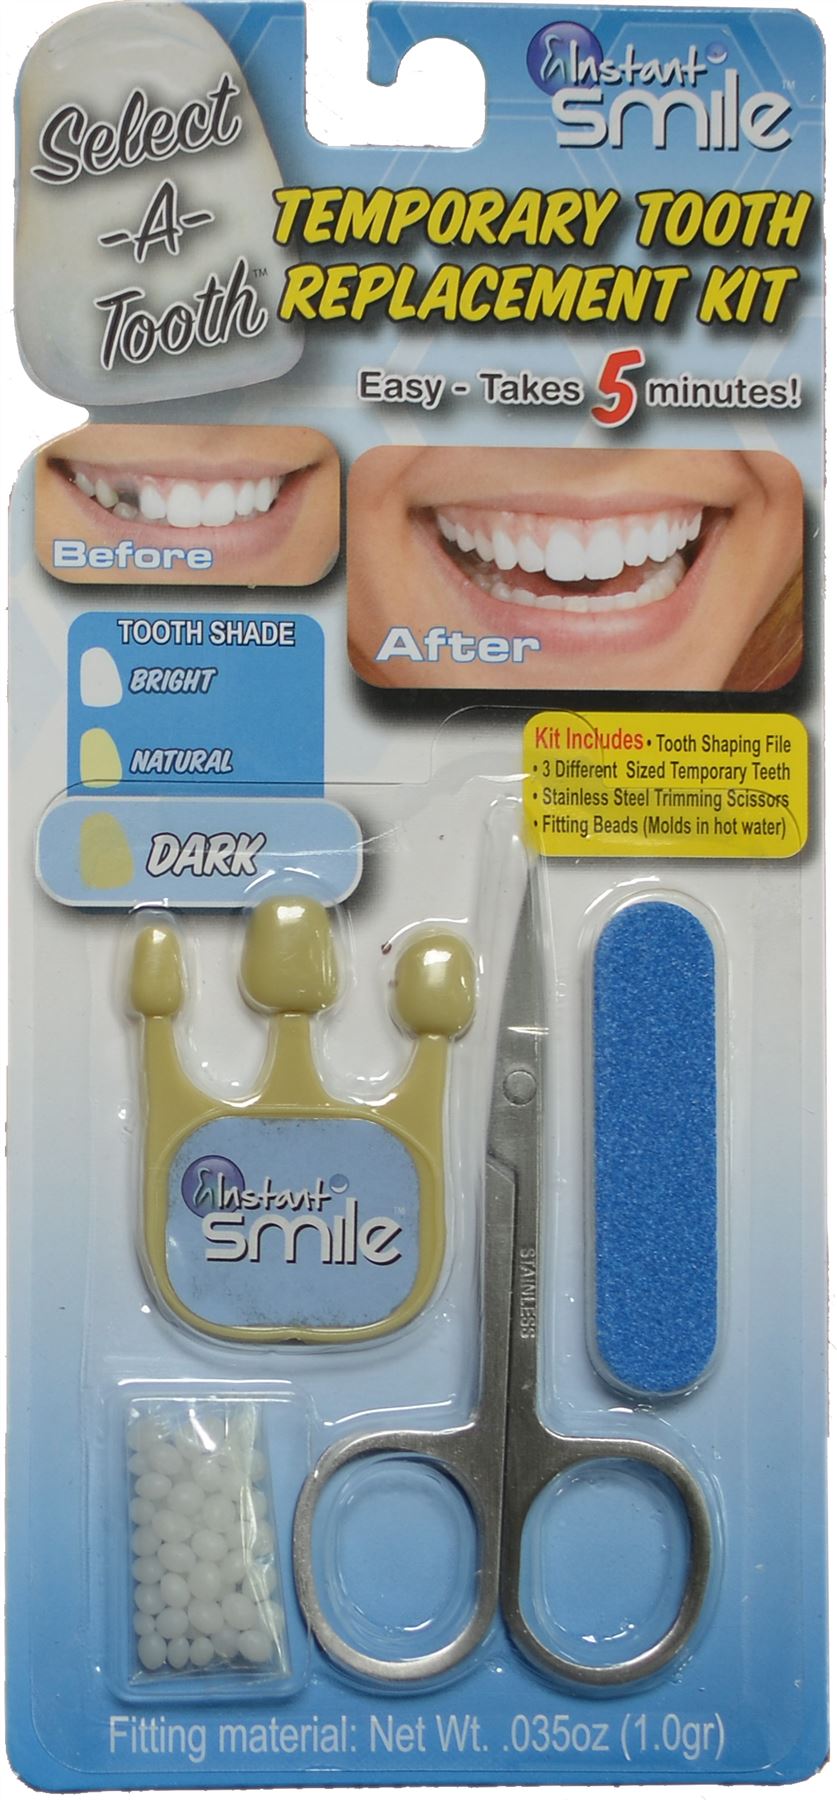 Instant Smile Select A Tooth Temporary Tooth Replacement Kit- Dark, 1 -  Harris Teeter